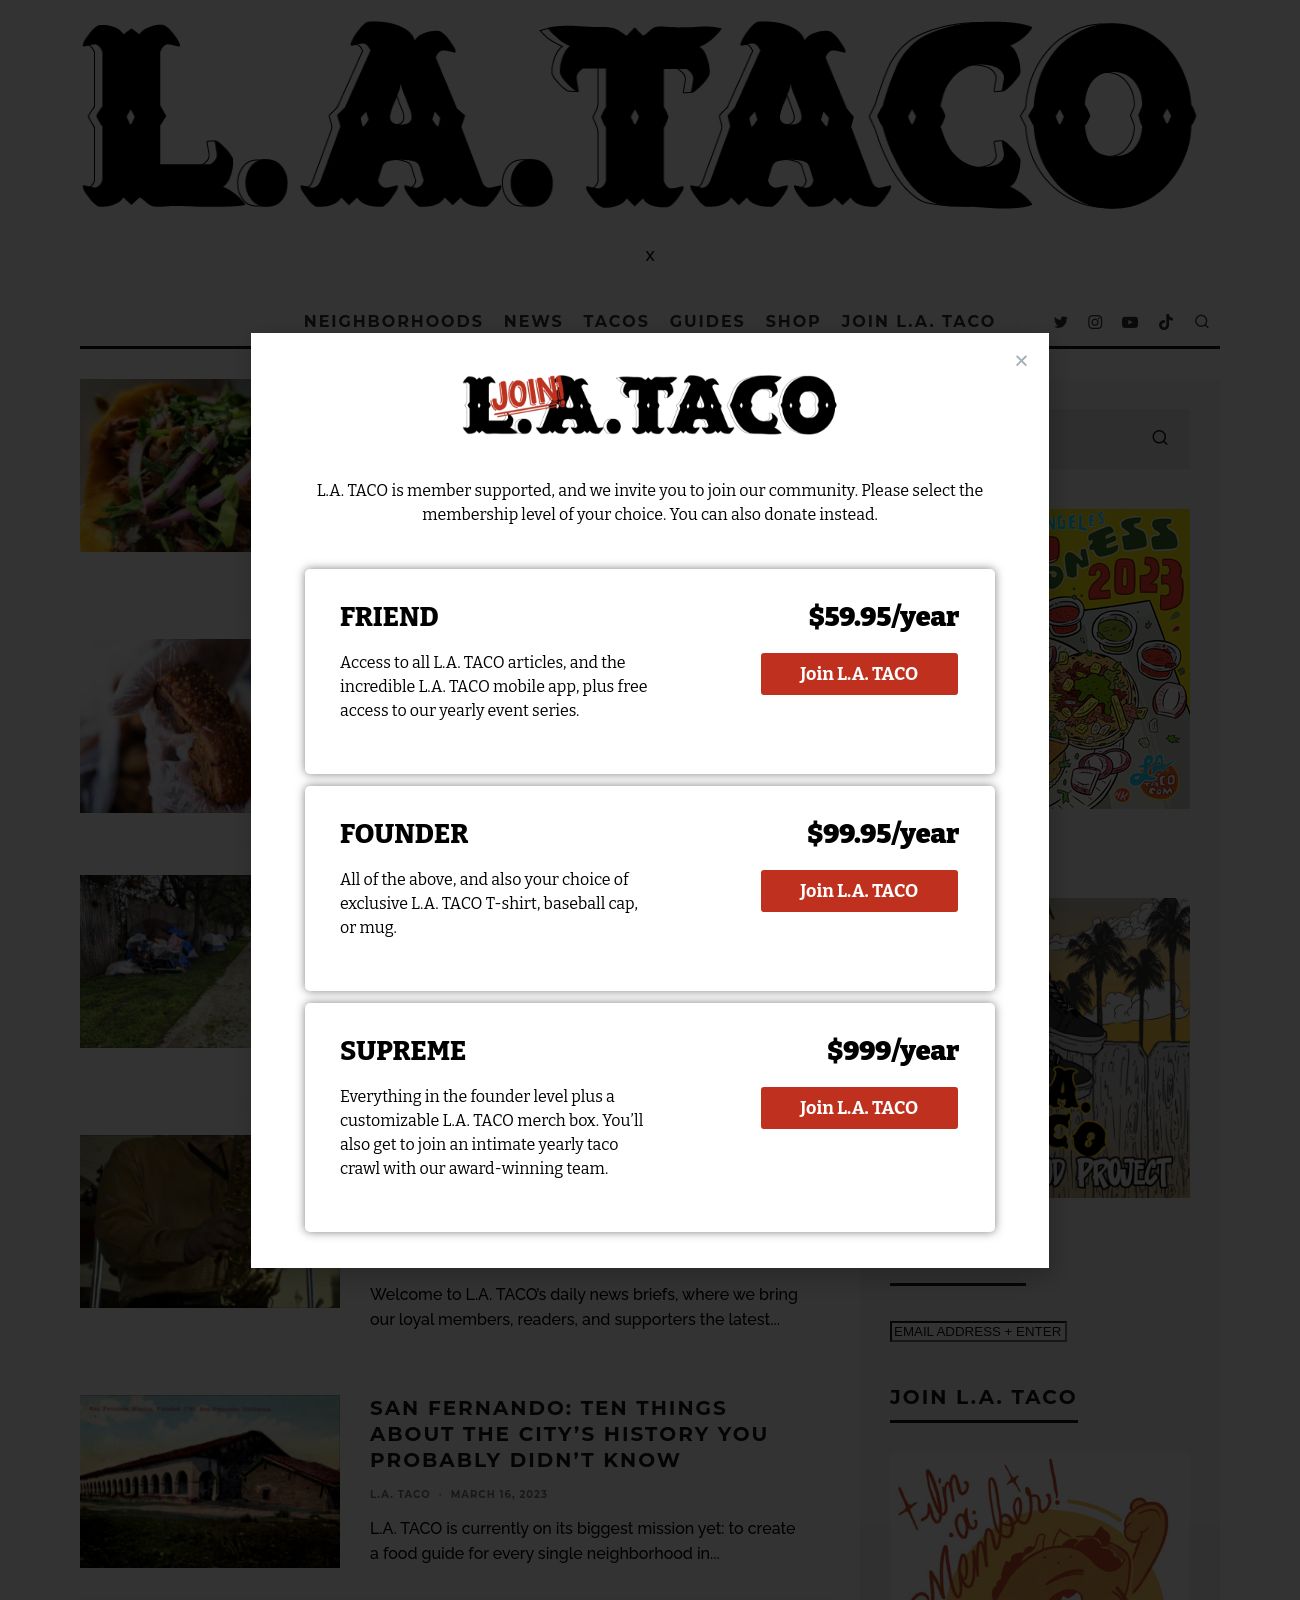 L.A. Taco at 2023-03-19 16:20:43-07:00 local time